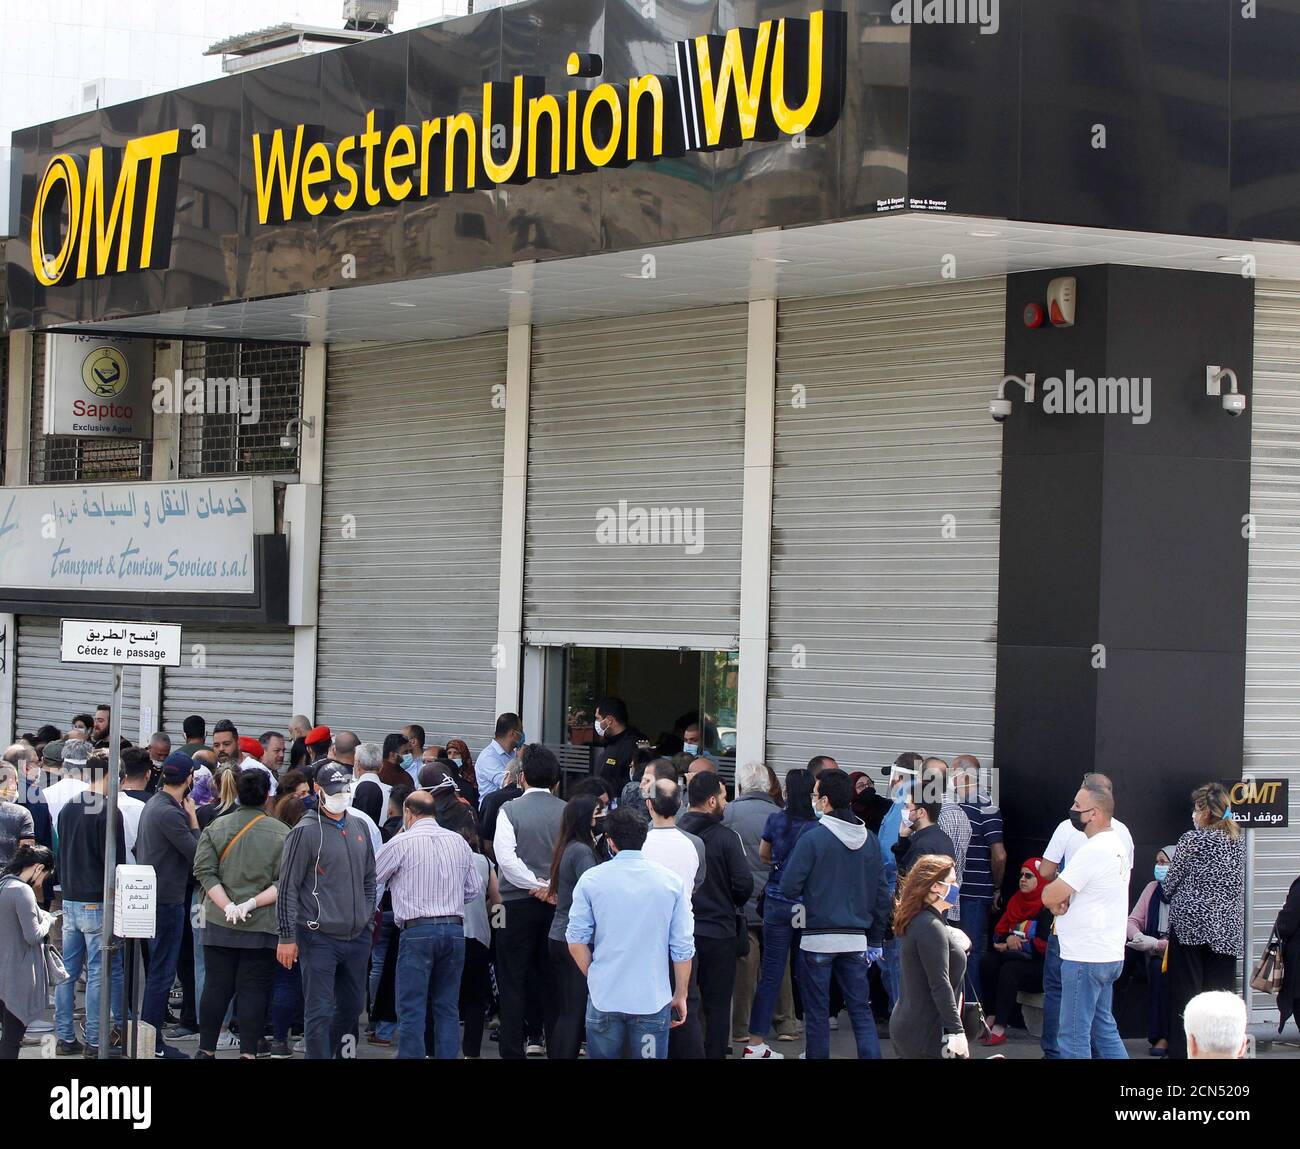 Crowds form outside the money transfer offices of Western Union and OMT  after customers were informed it was the last day to retrieve transfers in  dollars, in Beirut, Lebanon April 23, 2020.